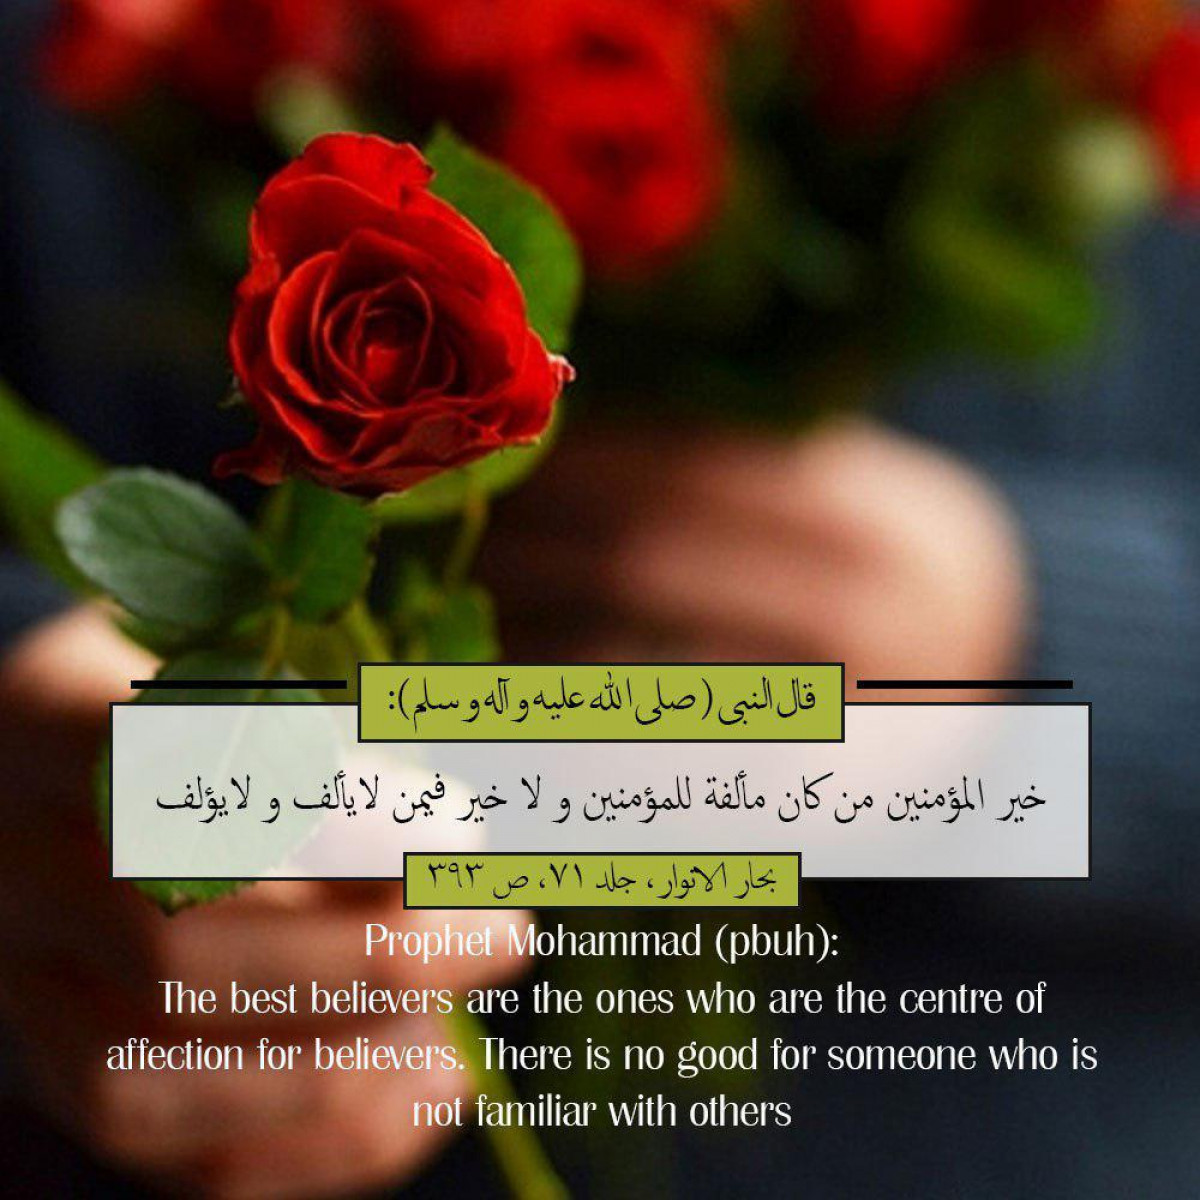 Prophet Mohammad (pbuh): The best believers are the ones who are the centre of affection for believers